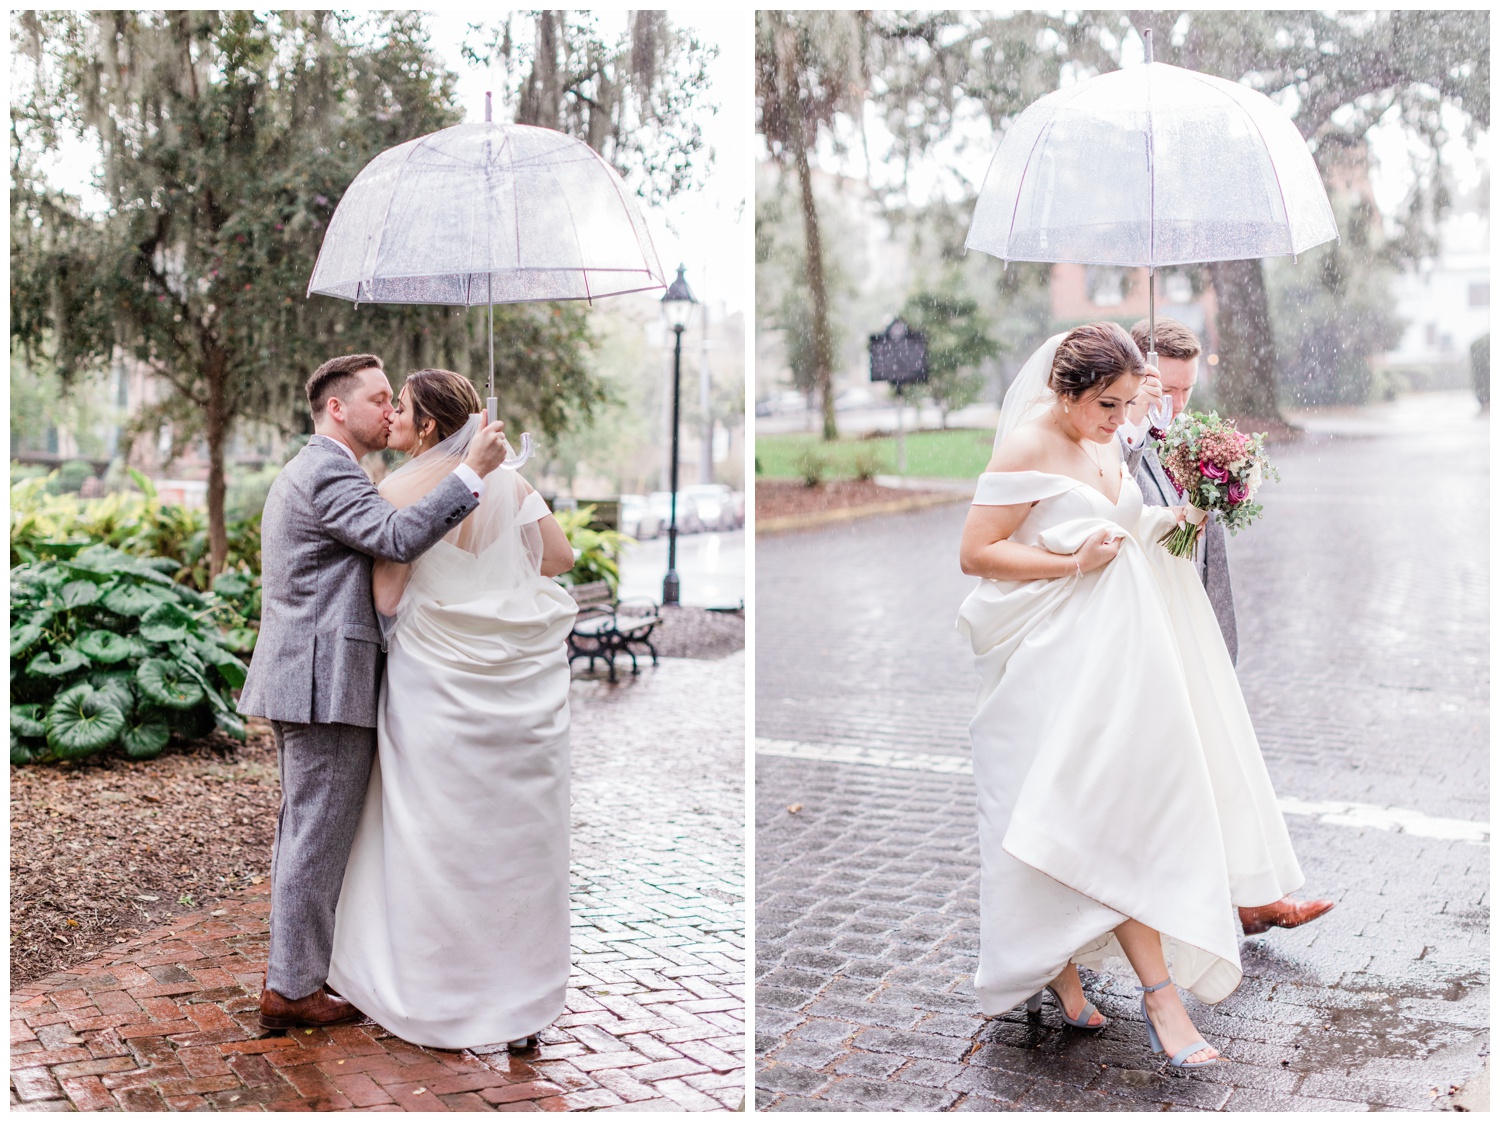 Rainy day wedding pictures - The Savannah Elopement Package